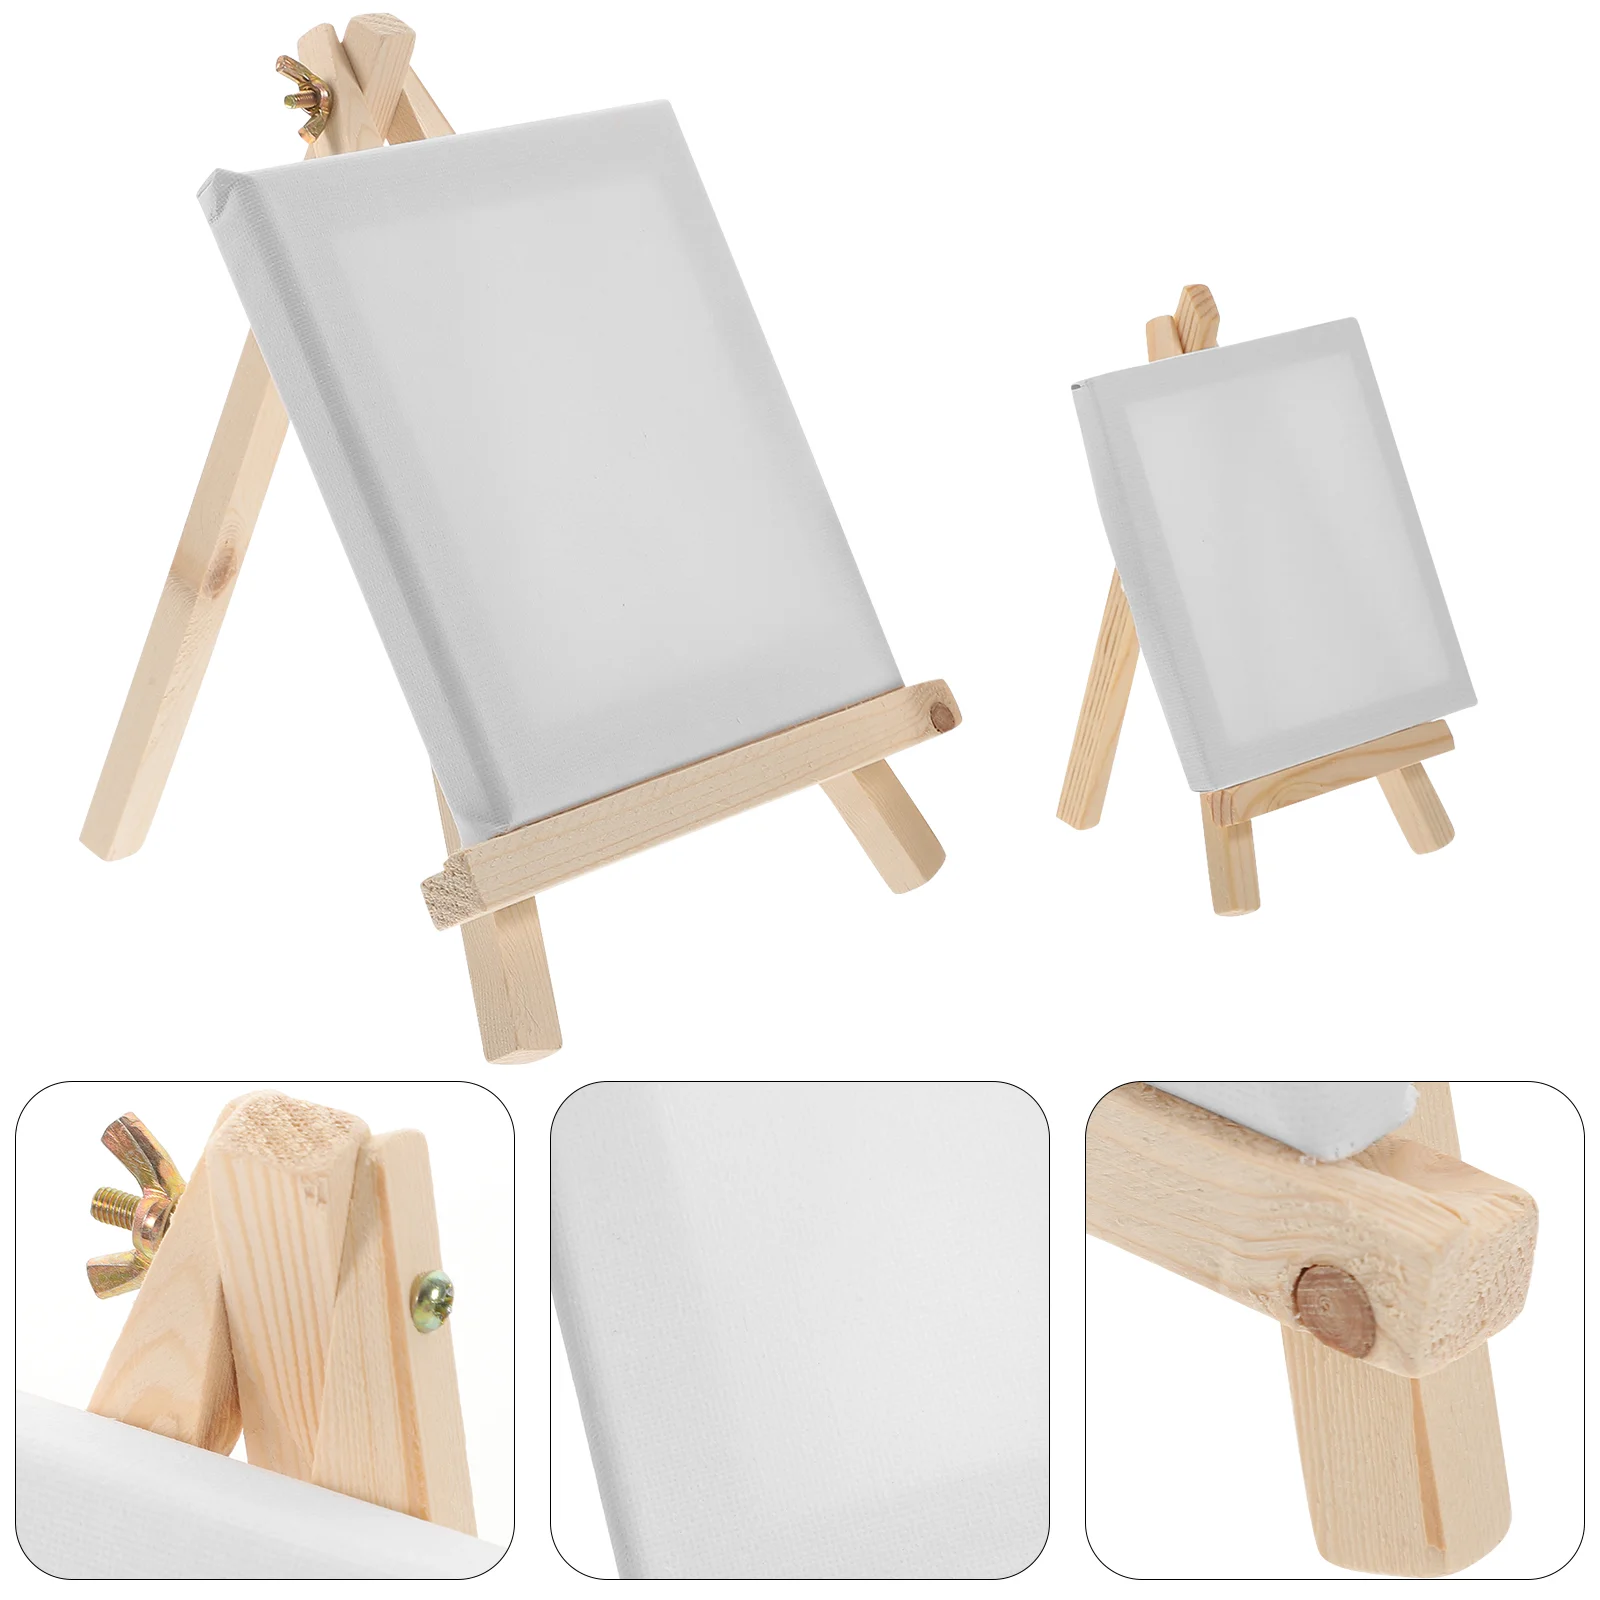 2PCs Canvas Easel Set White Blank Stretched Canvas with Wooden Easel Canvas Panel Boards for Artist Painting Business Wedding 2pcs canvas easel set white blank stretched canvas with wooden easel canvas panel boards for artist painting business wedding